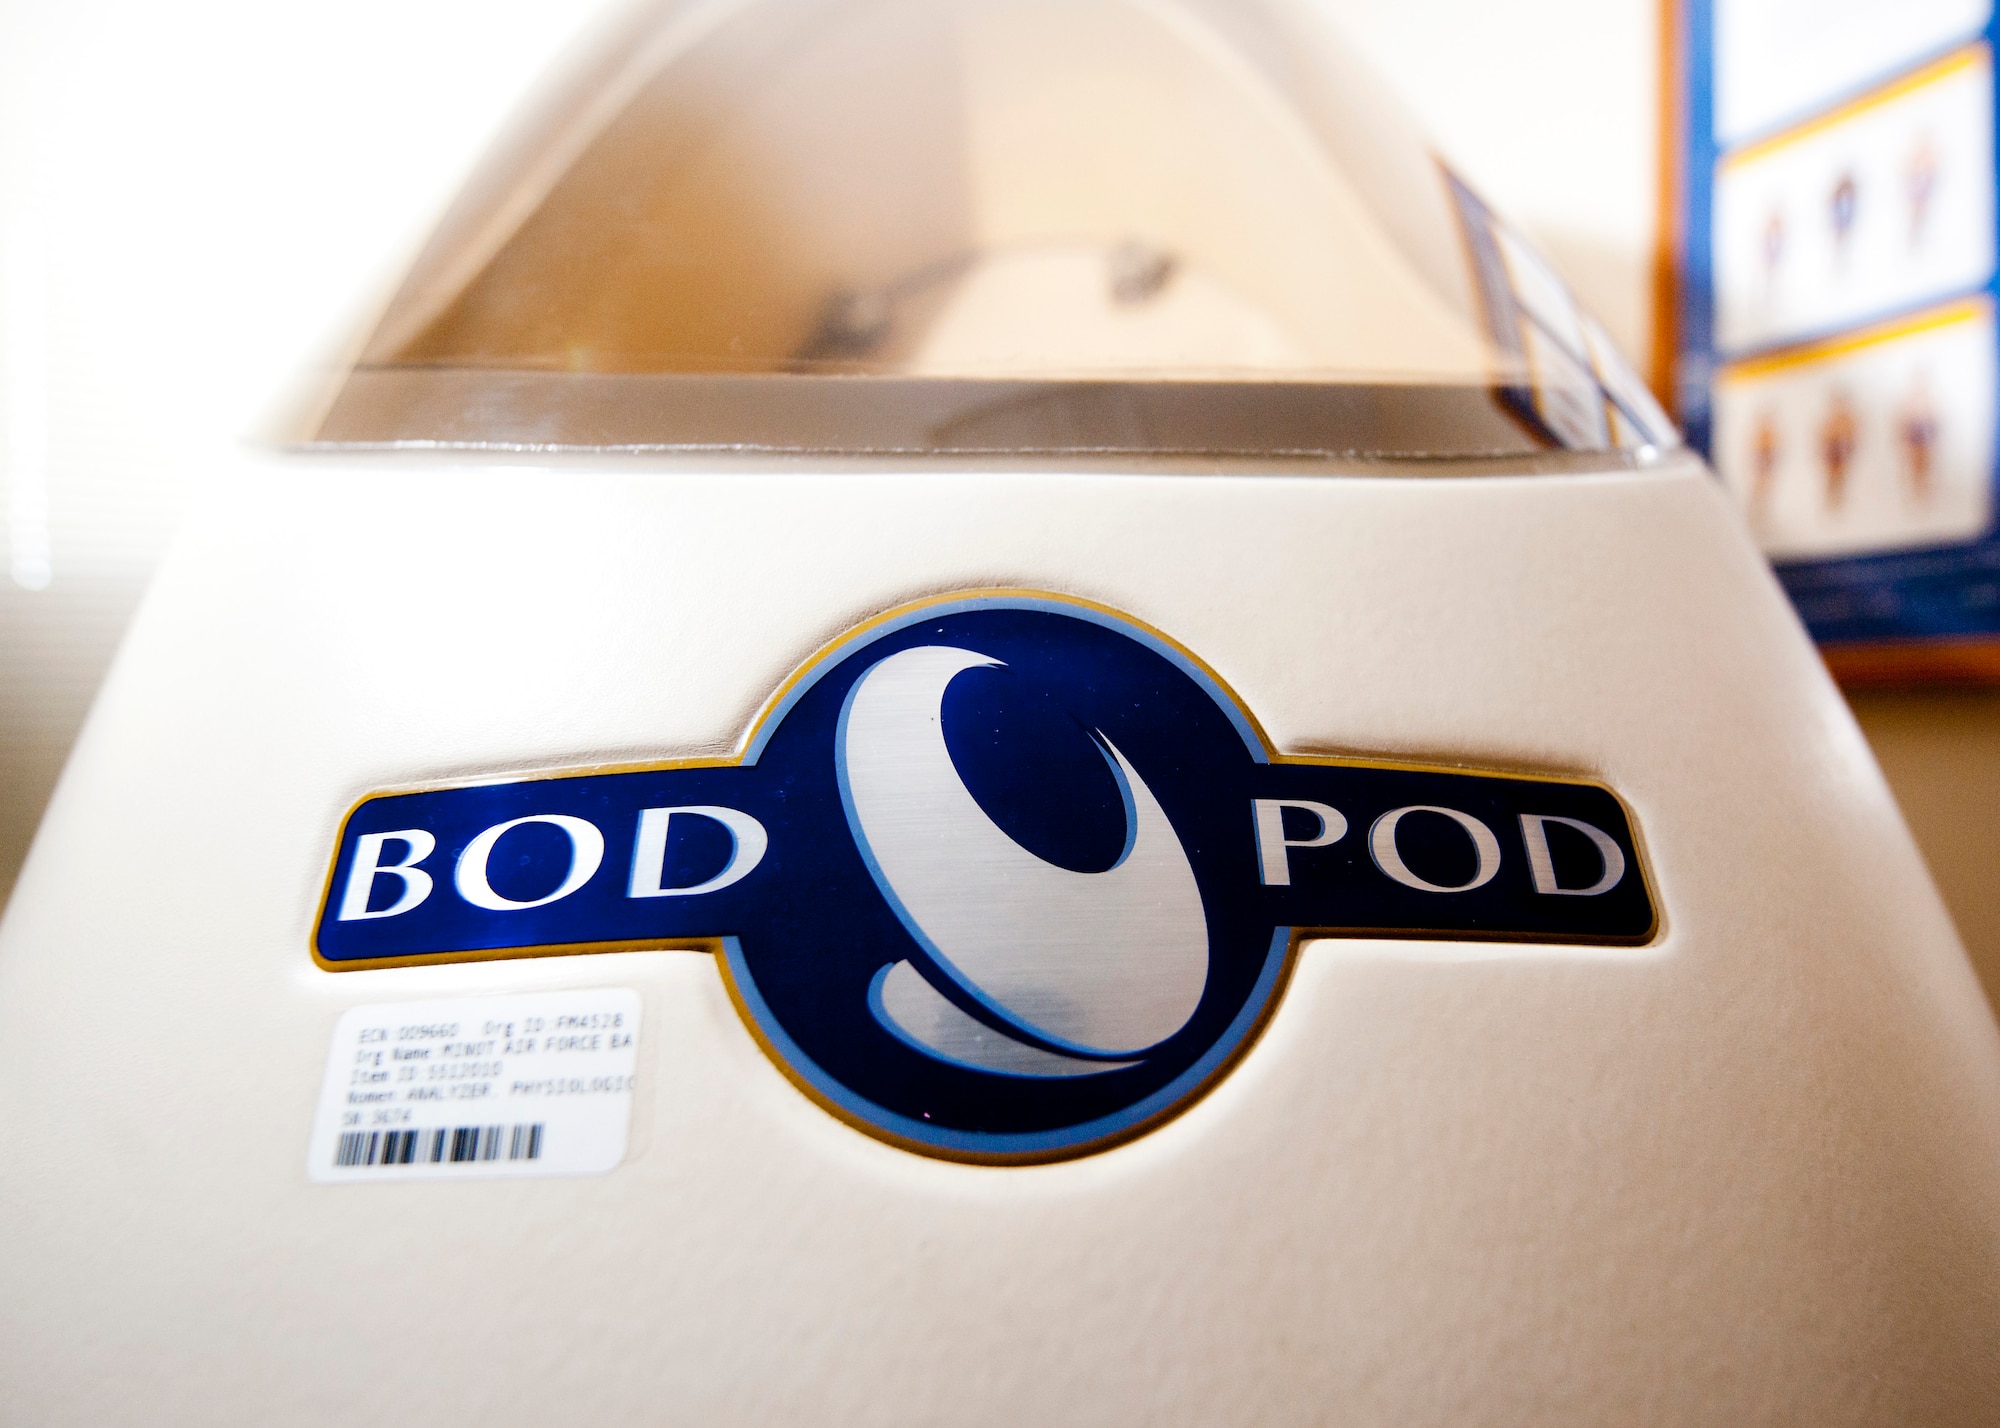 The Bod Pod is used to determine a person’s body fat, weight and measure their resting metabolic rate. (U.S. Air Force photo/Senior Airman J.T. Armstrong)